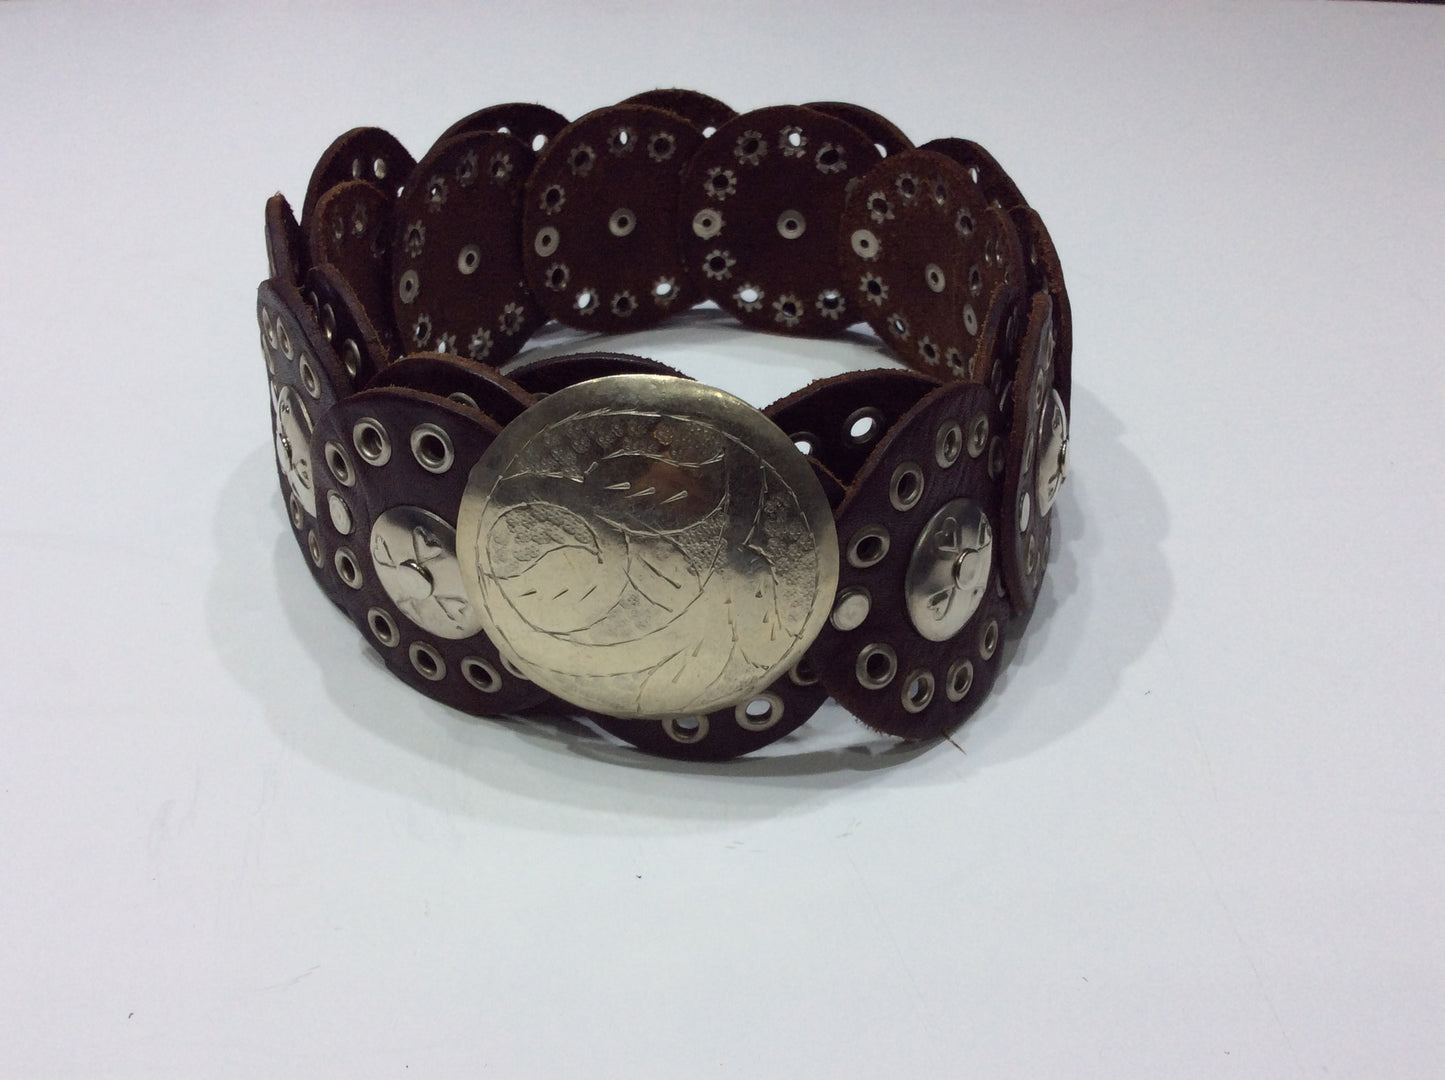 Belts-Wide Brown Leather Belt Formed by Concentric Circles with Engraved Silver Overlay, 2 1/2" Diameter Silver Buckle